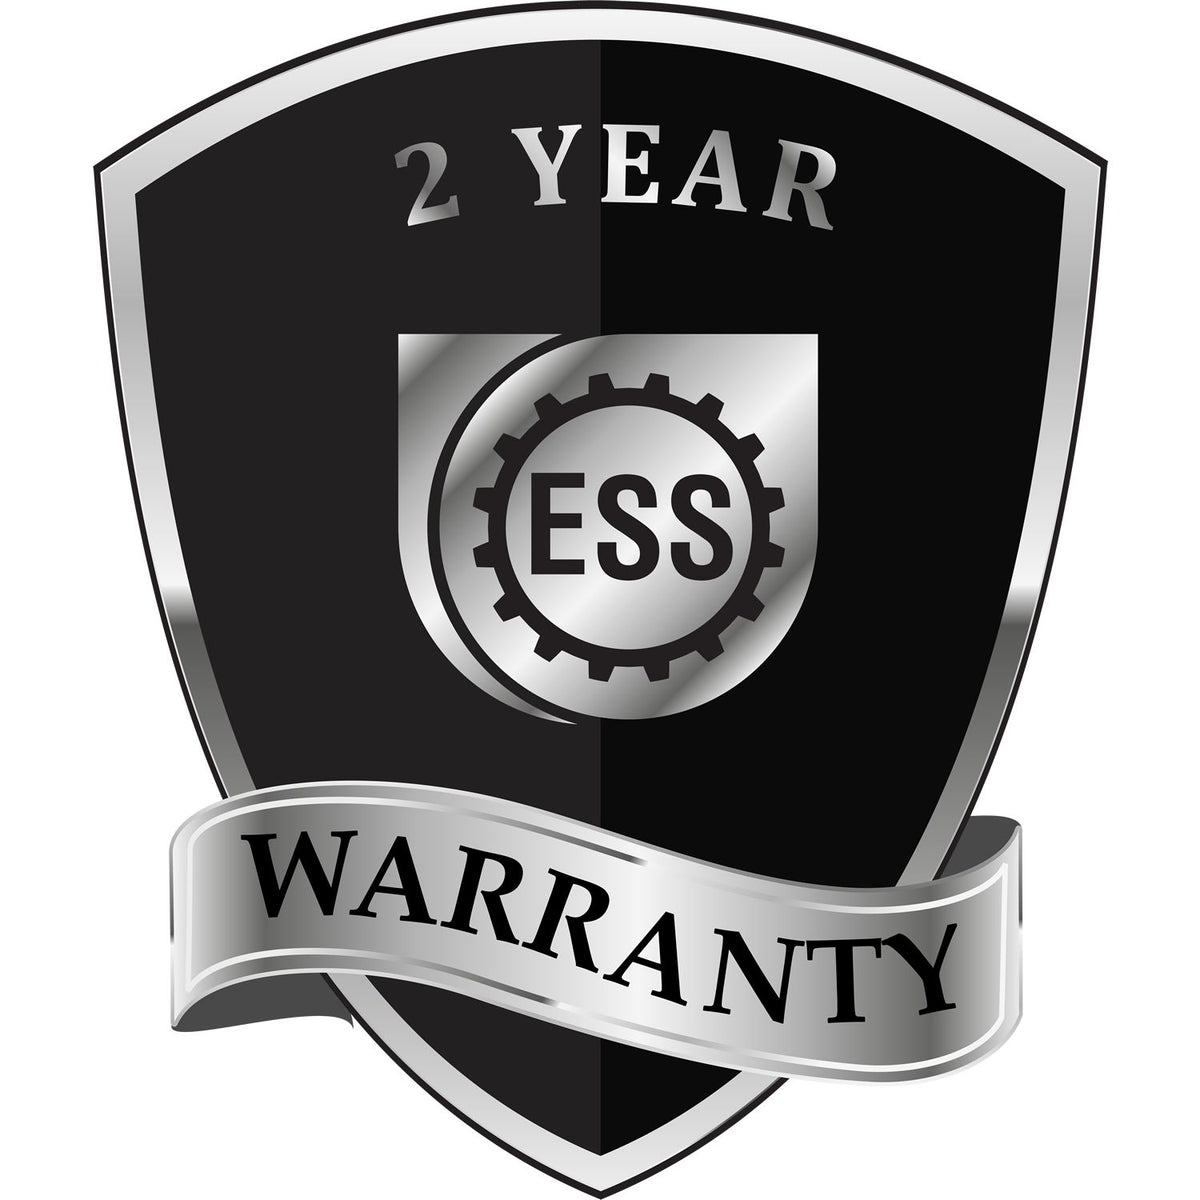 A badge or emblem showing a warranty icon for the Heavy Duty Cast Iron North Dakota Architect Embosser